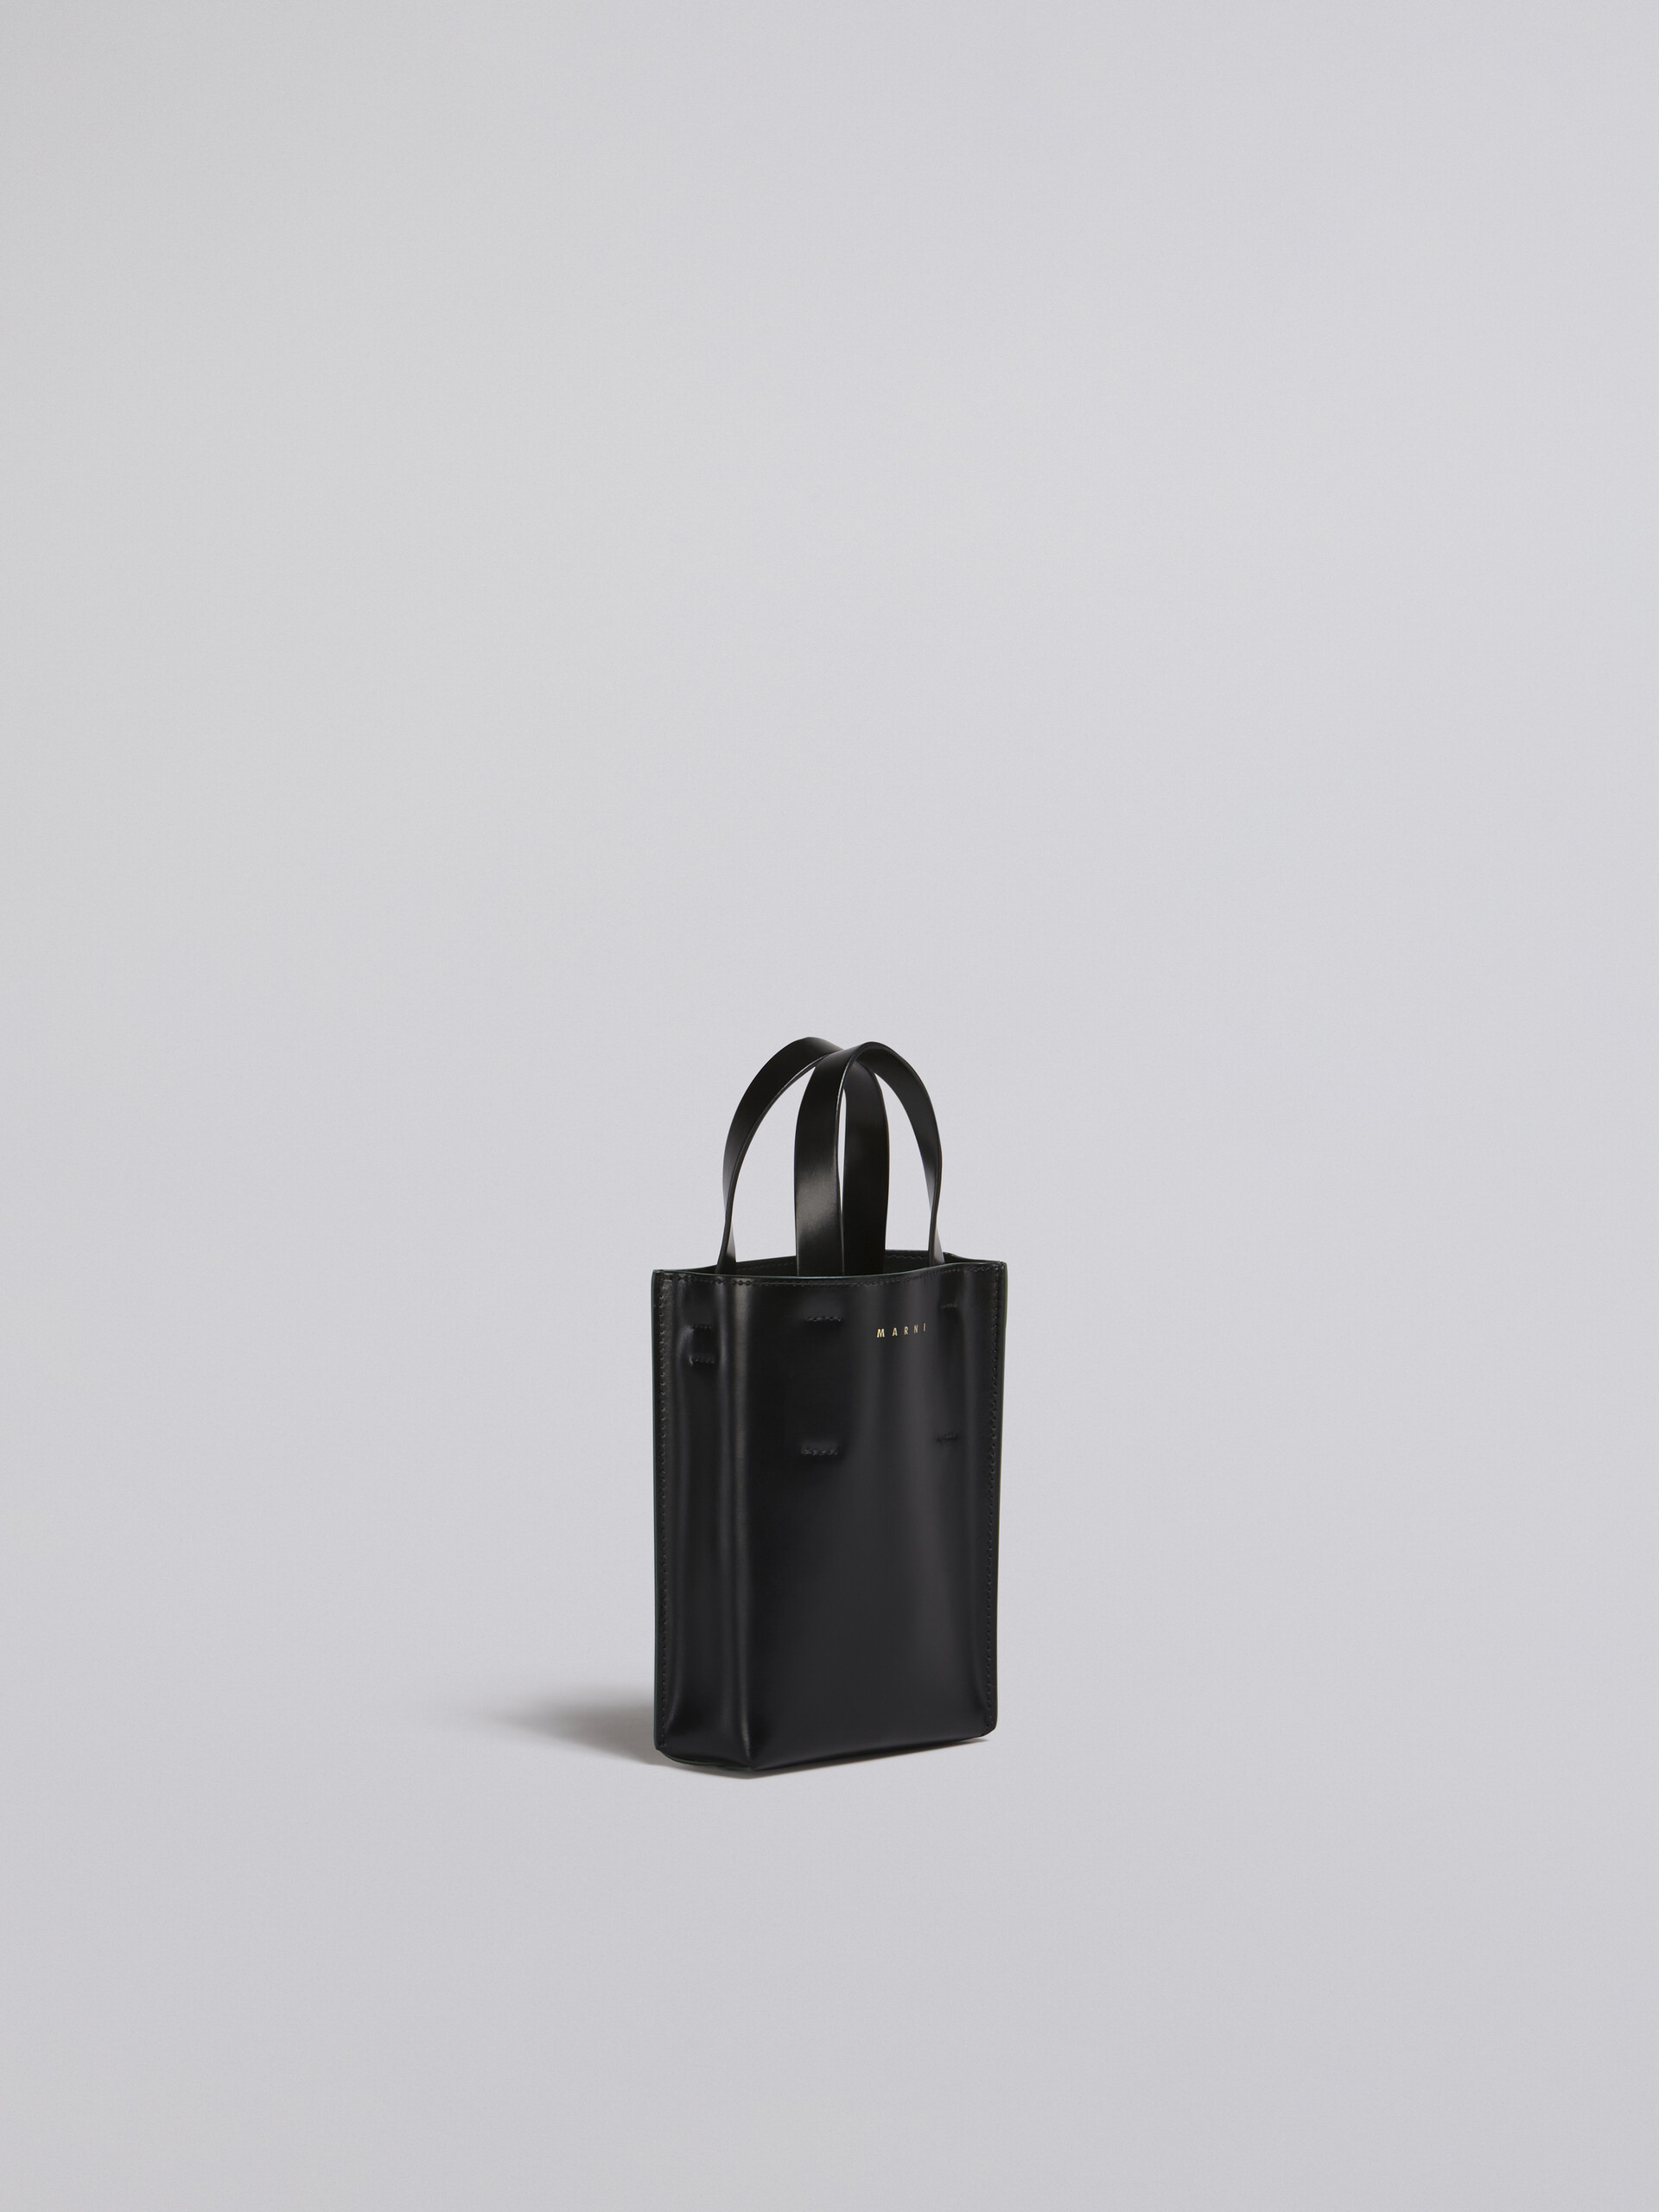 Nano MUSEO shopping bag in black shiny smooth calfskin with shoulder strap - Shopping Bags - Image 4